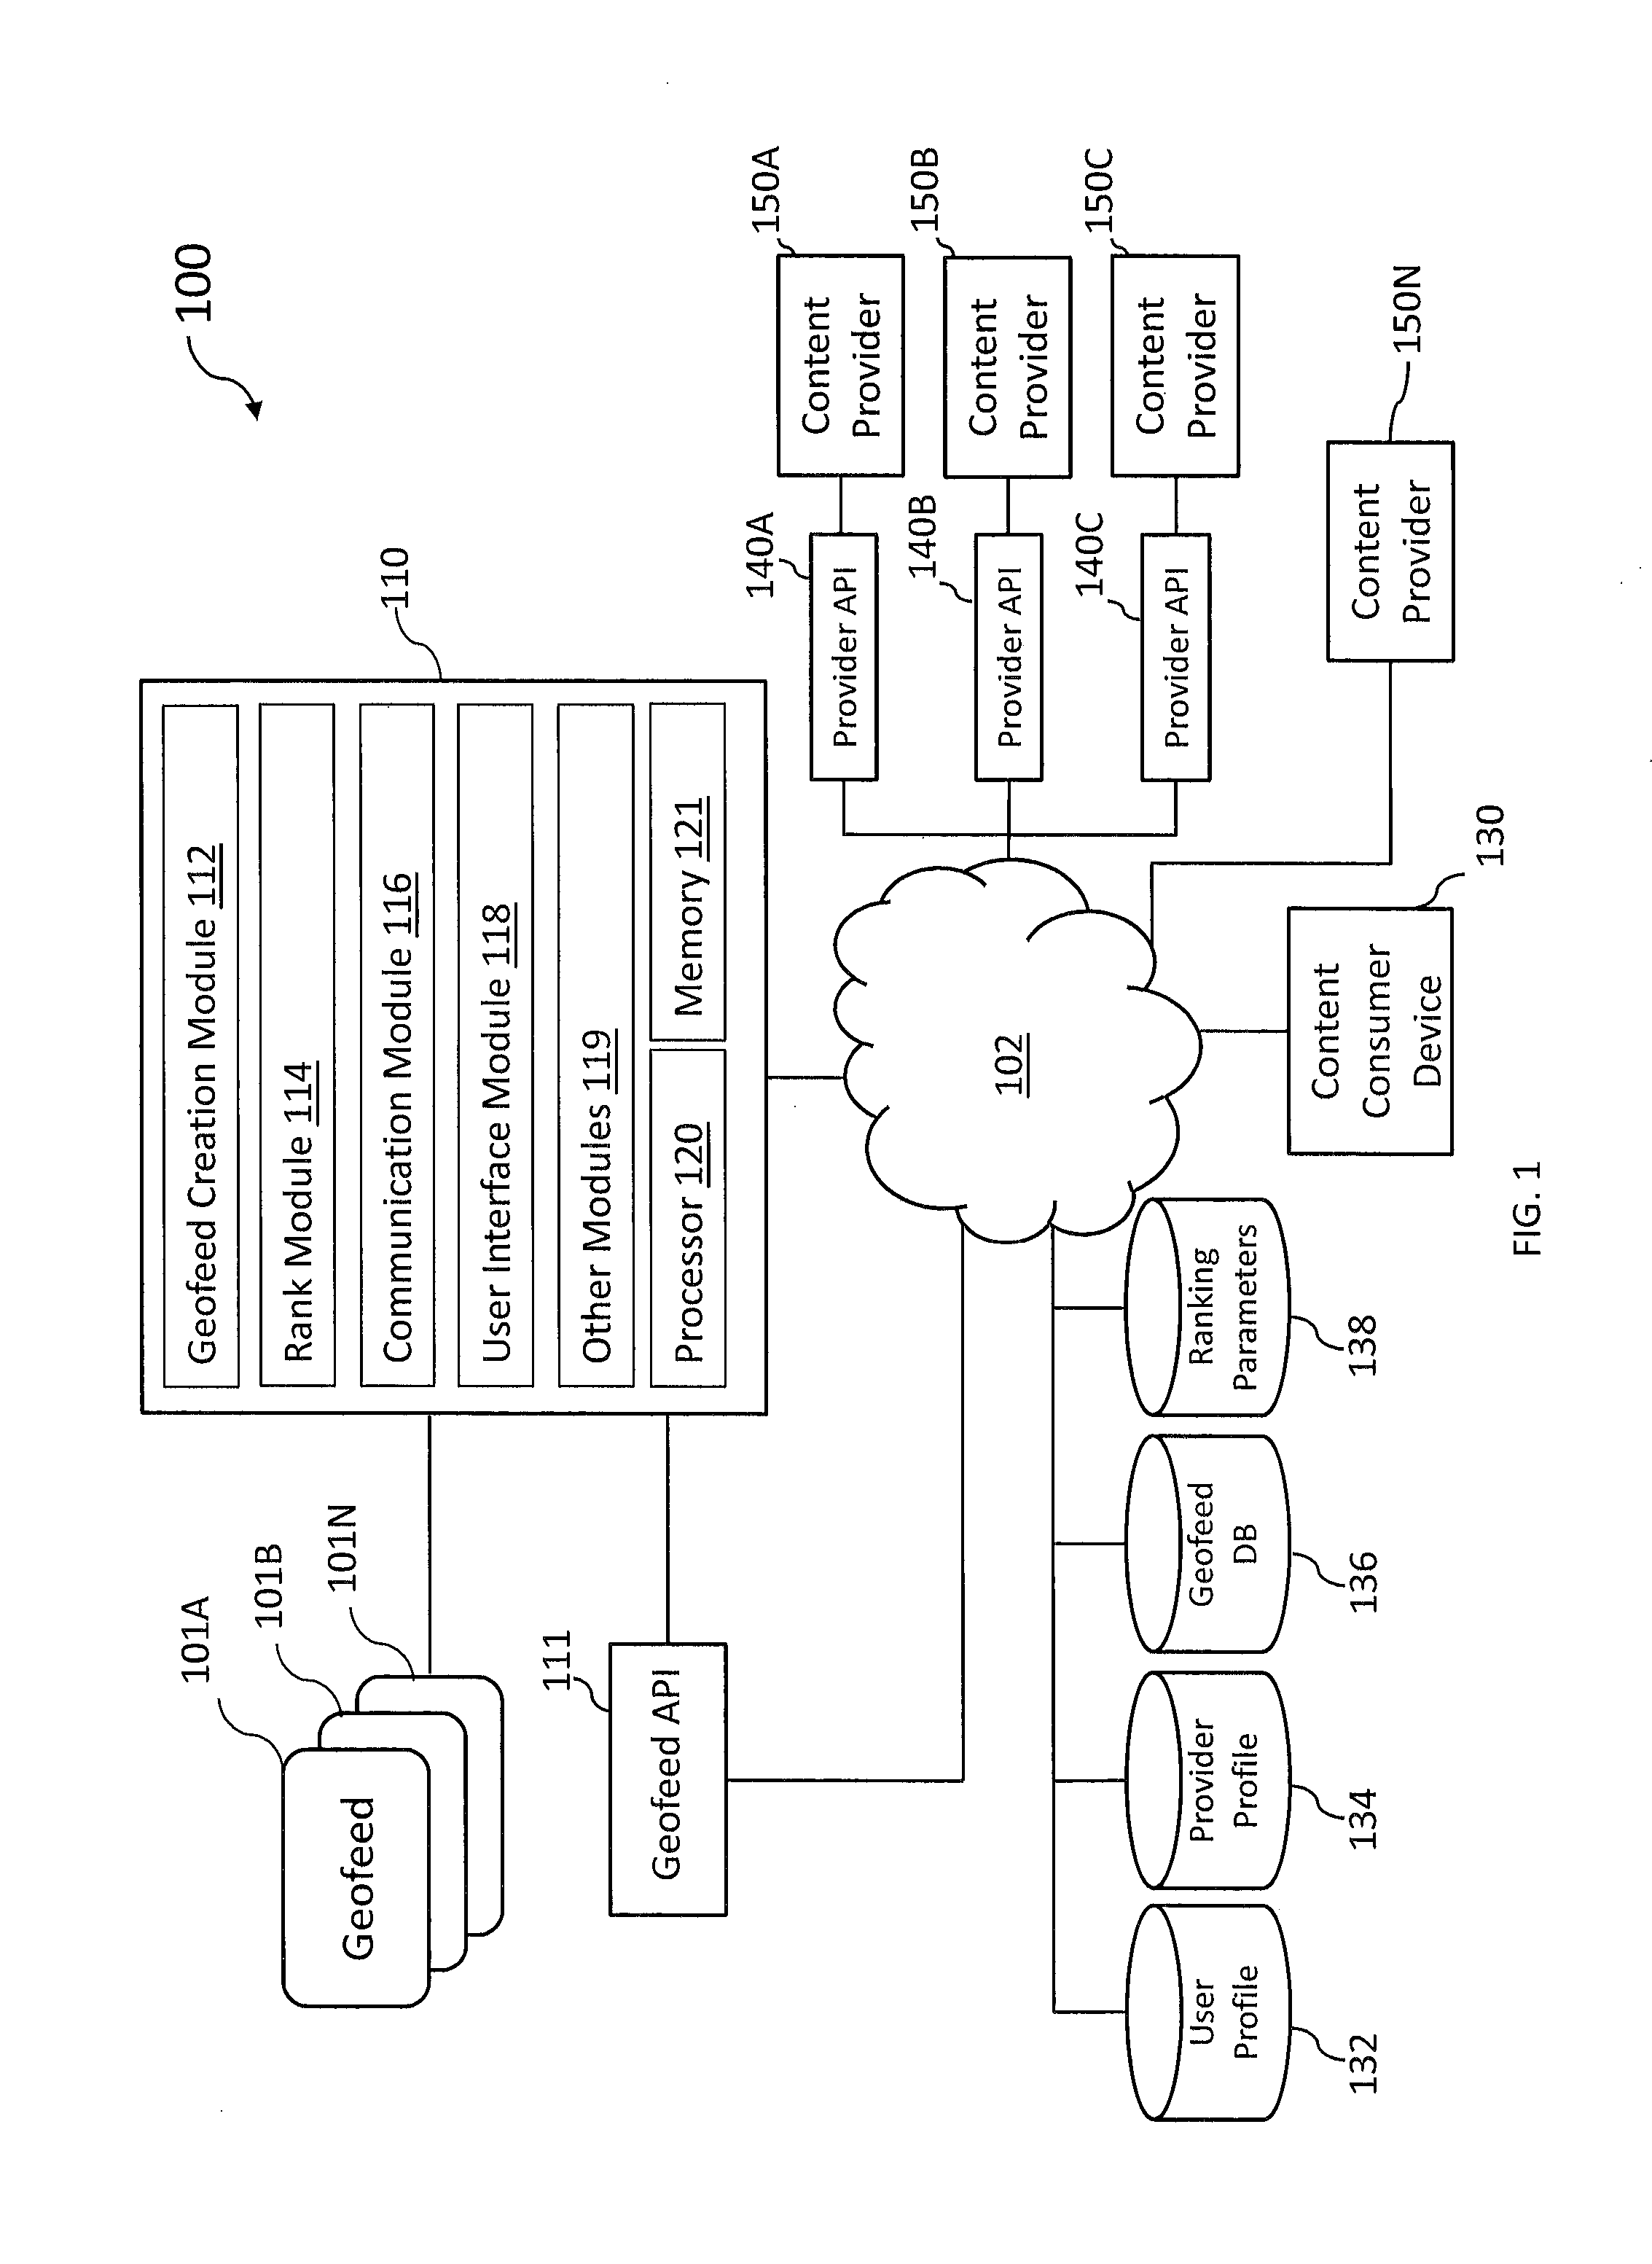 System and method for ranking geofeeds and content within geofeeds